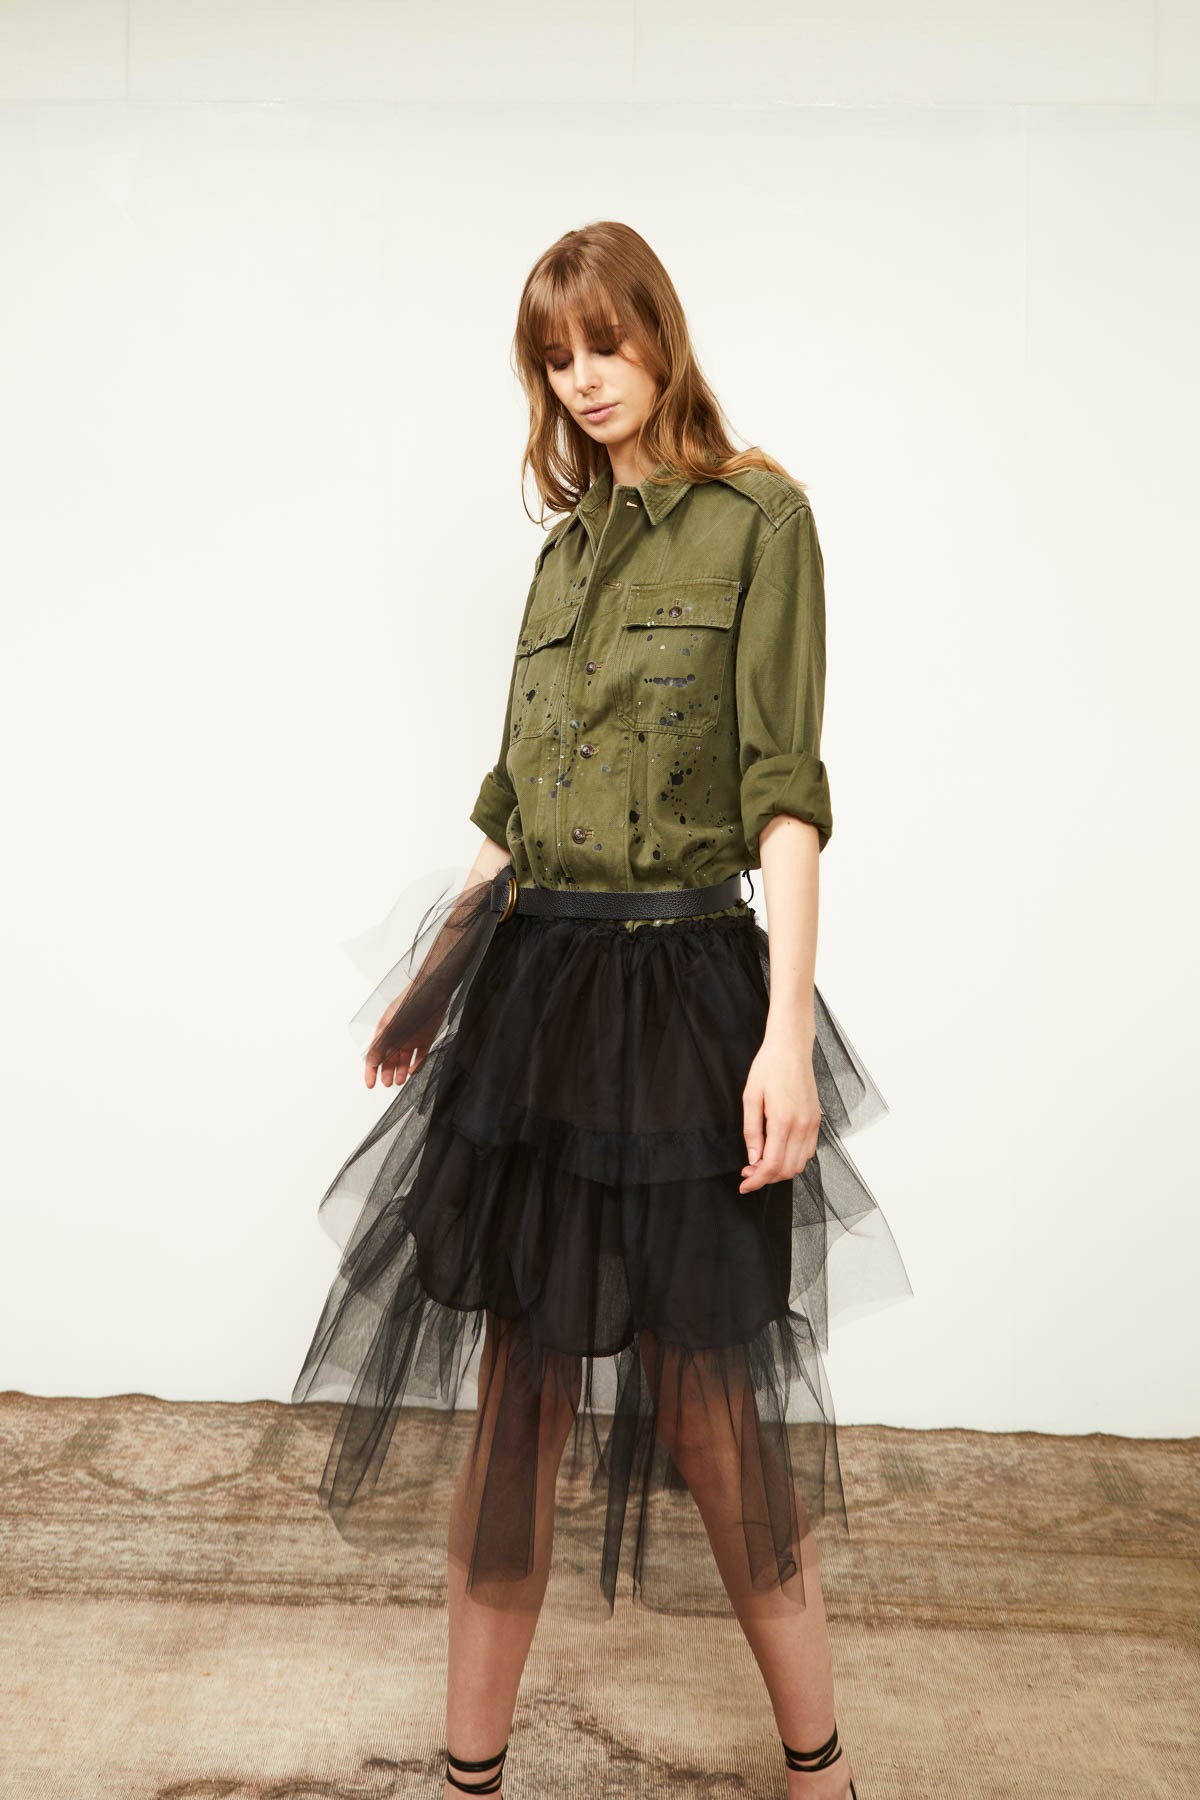 TULLE DRESS WITH ARMY SHIRT